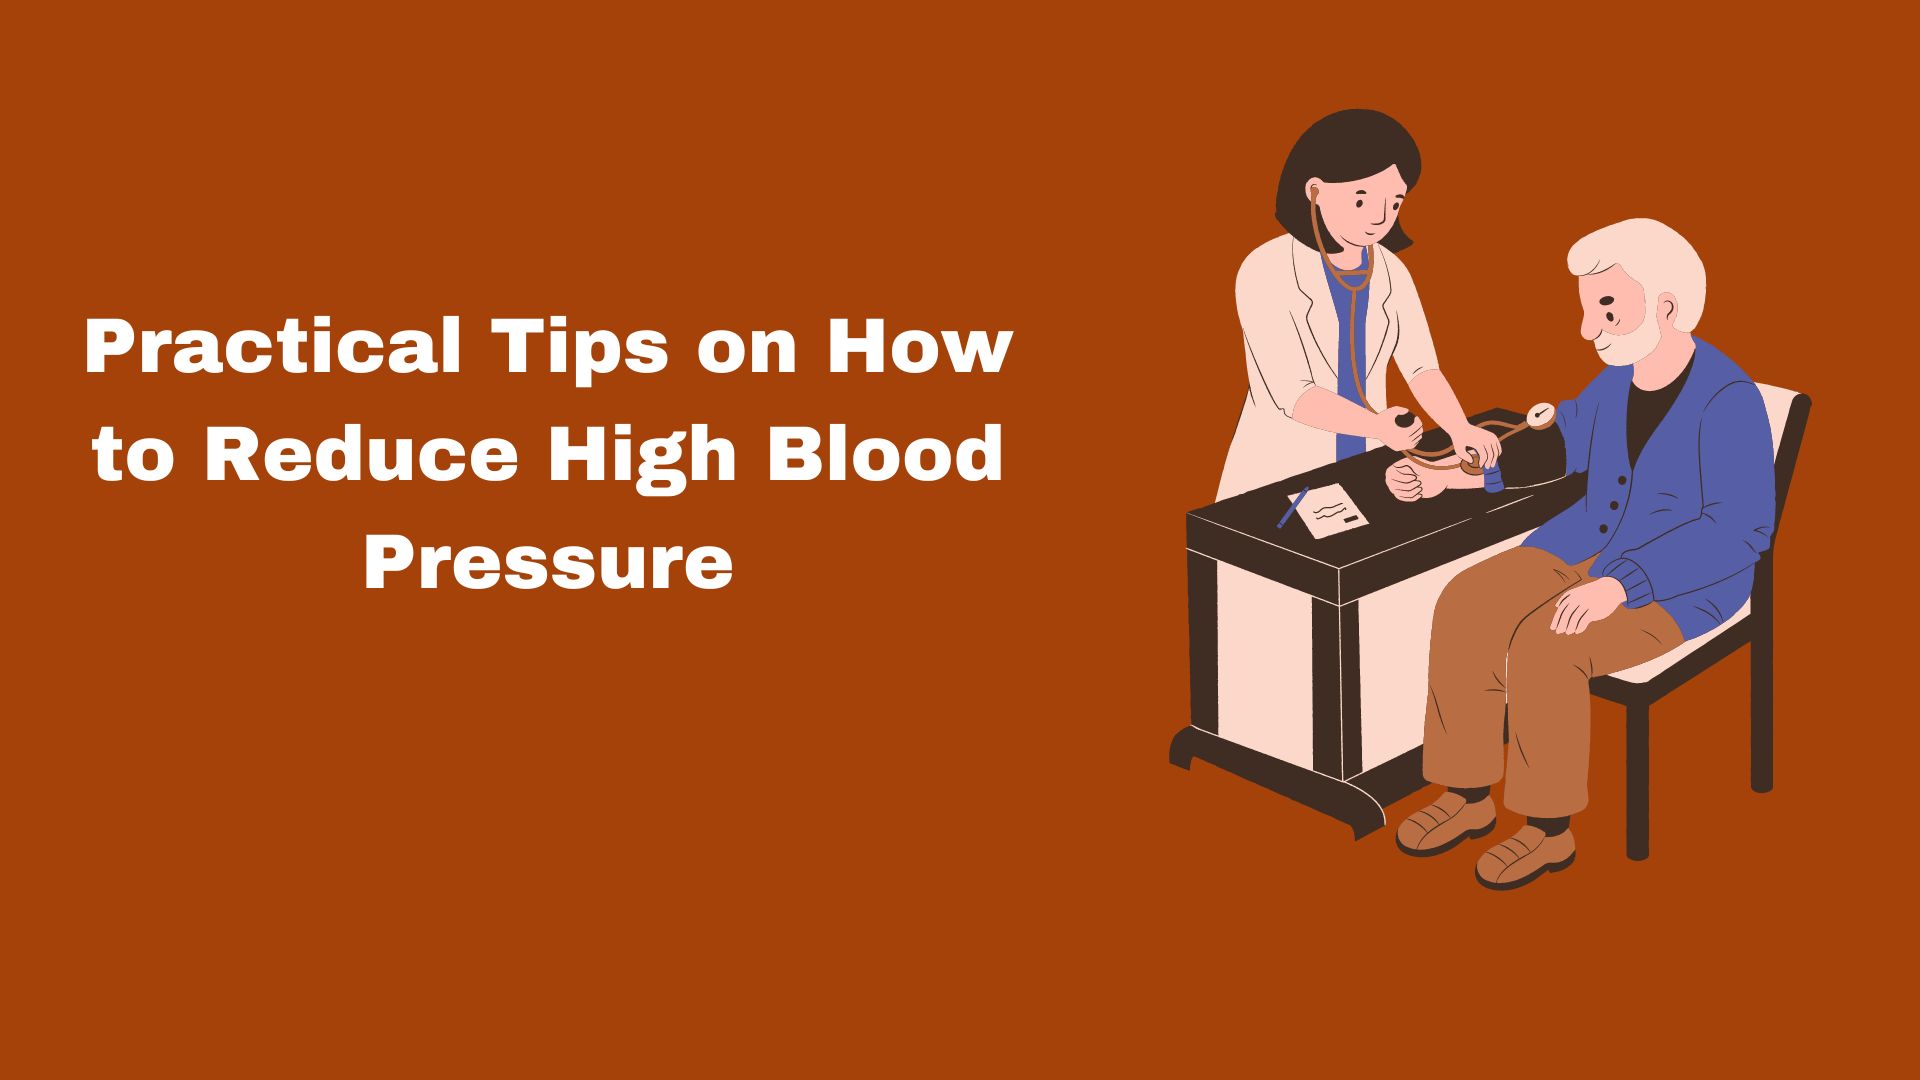 Practical Tips on How to Reduce High Blood Pressure